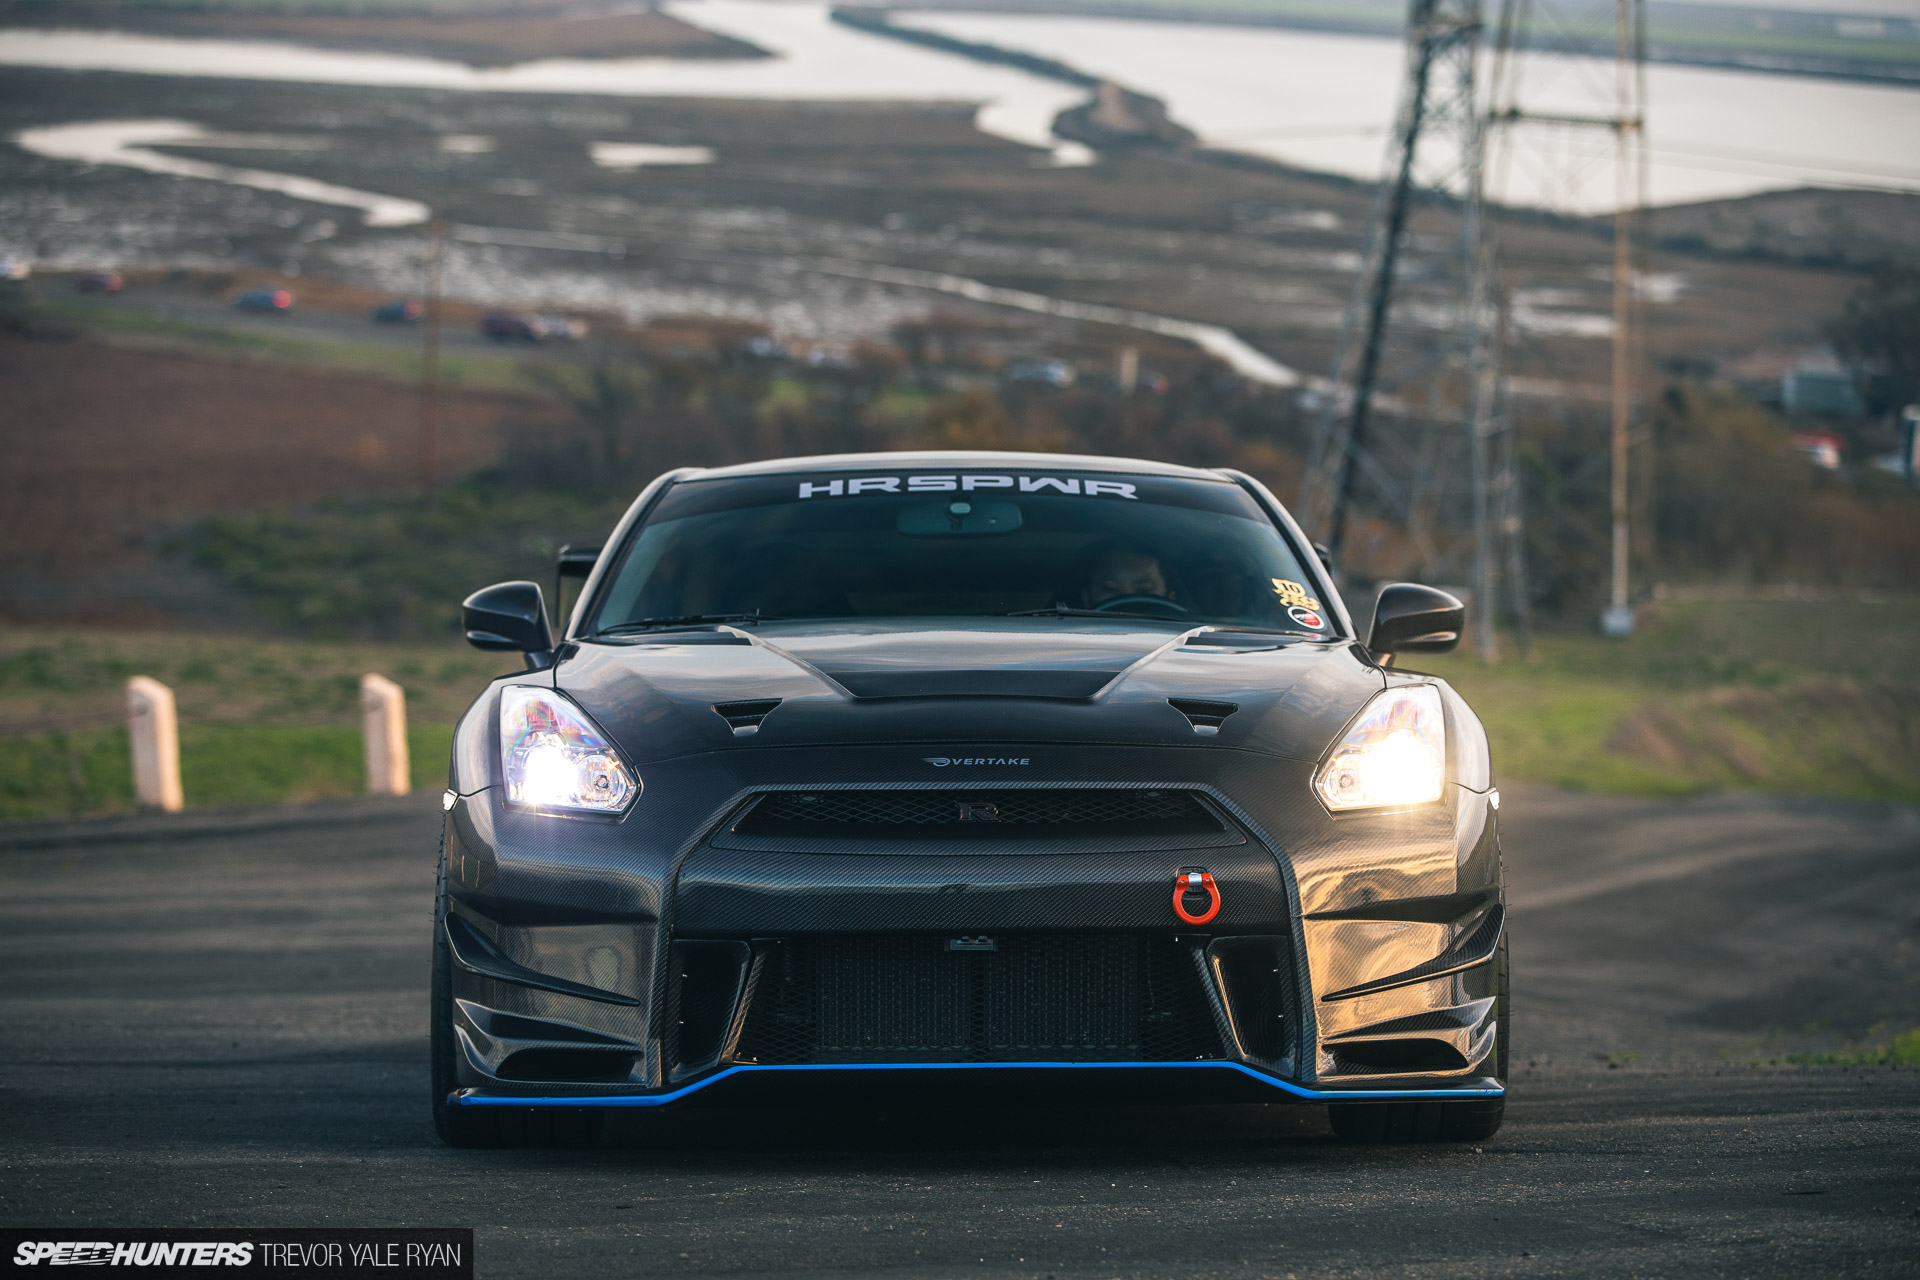 Carbon On Carbon: An Overtake GT-R In California - Speedhunters